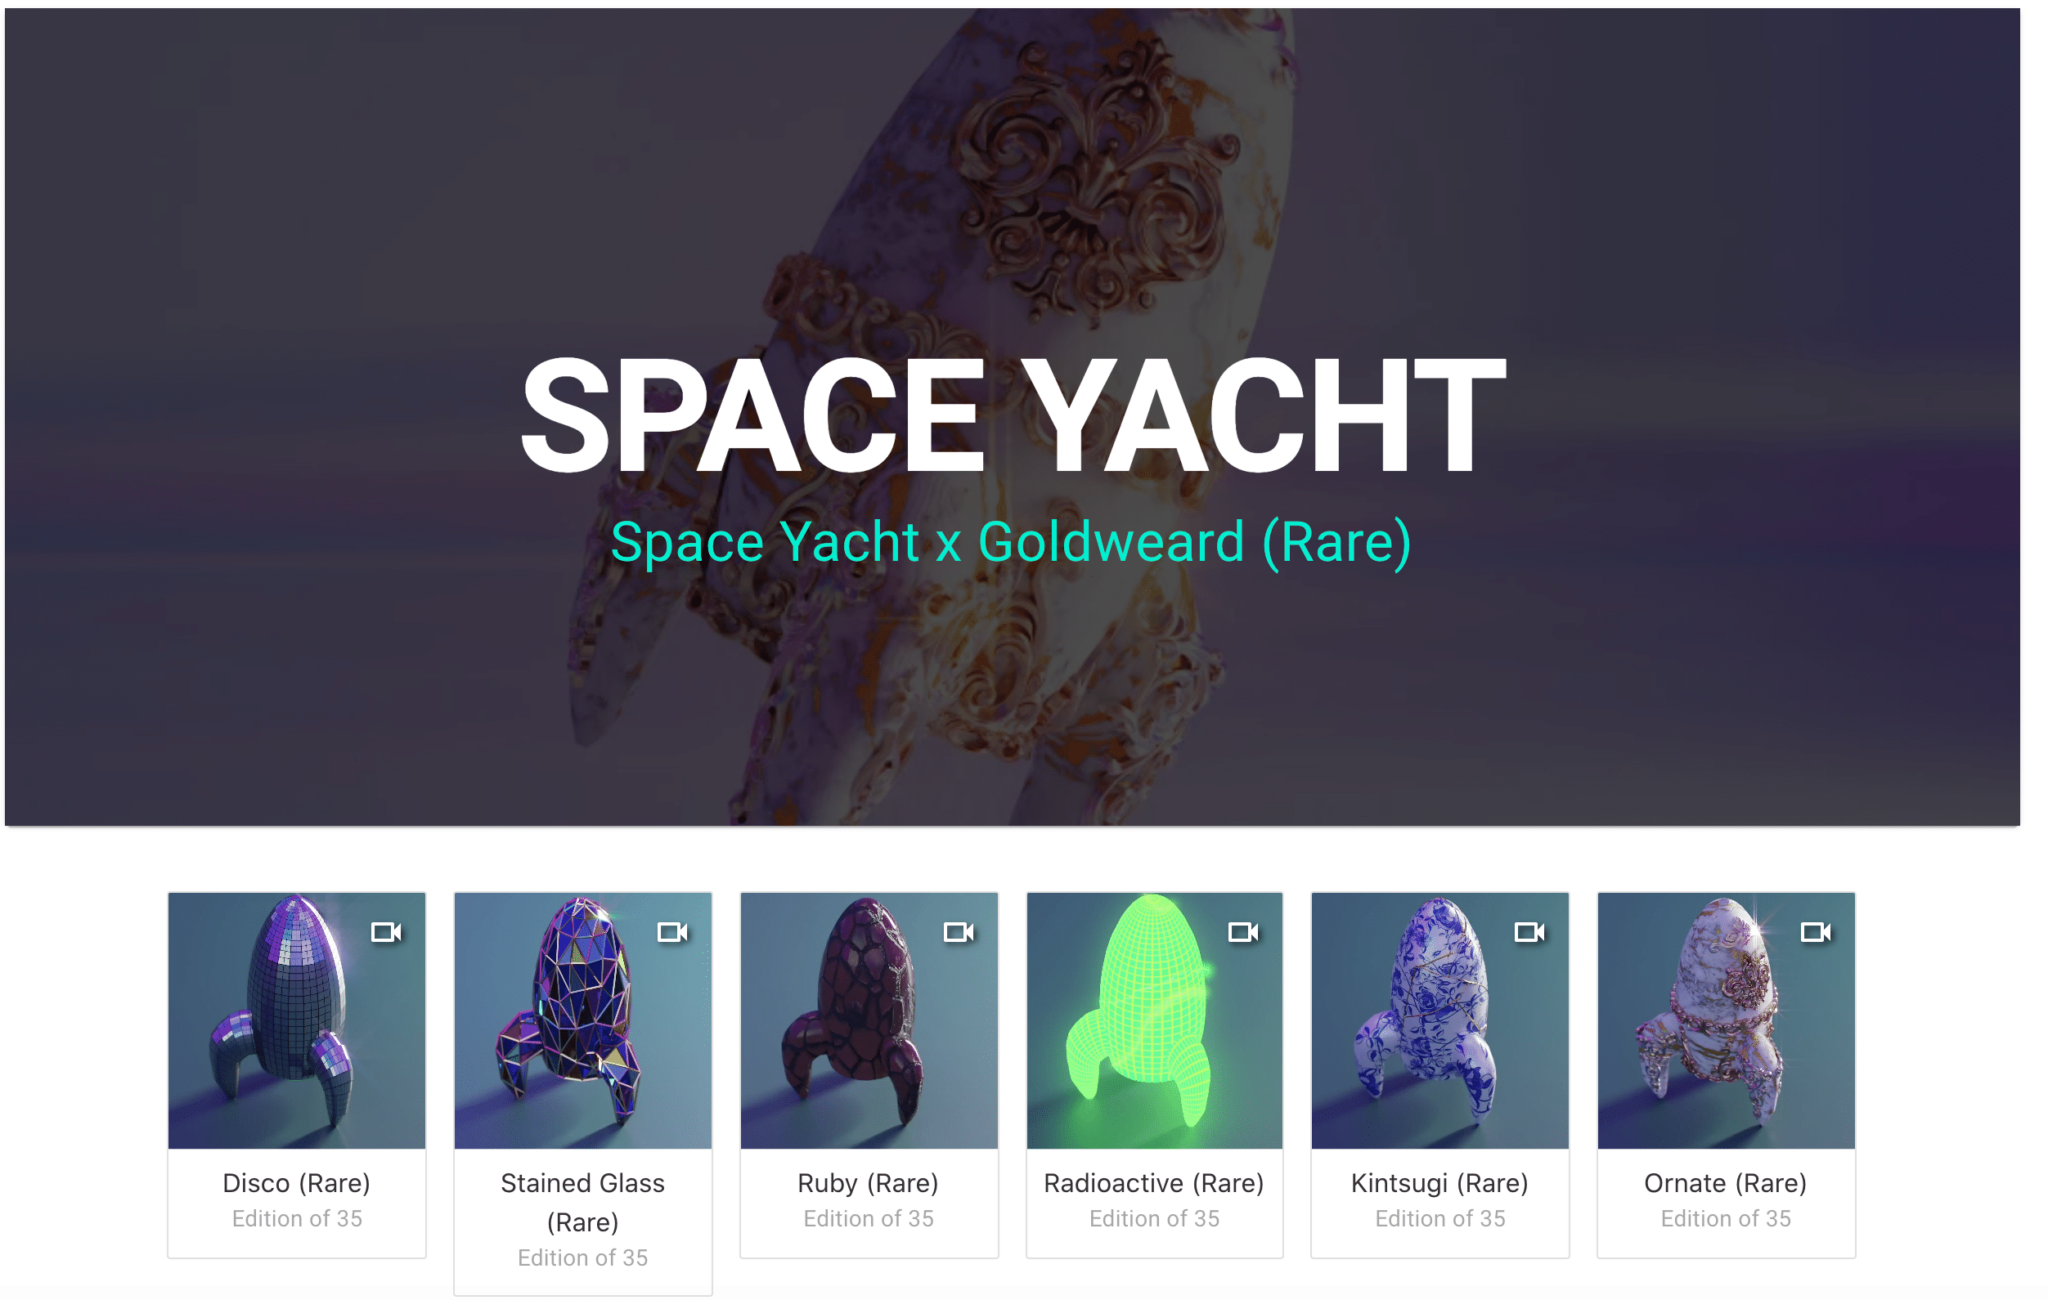 Space Yacht's collection on NiftyGateway.